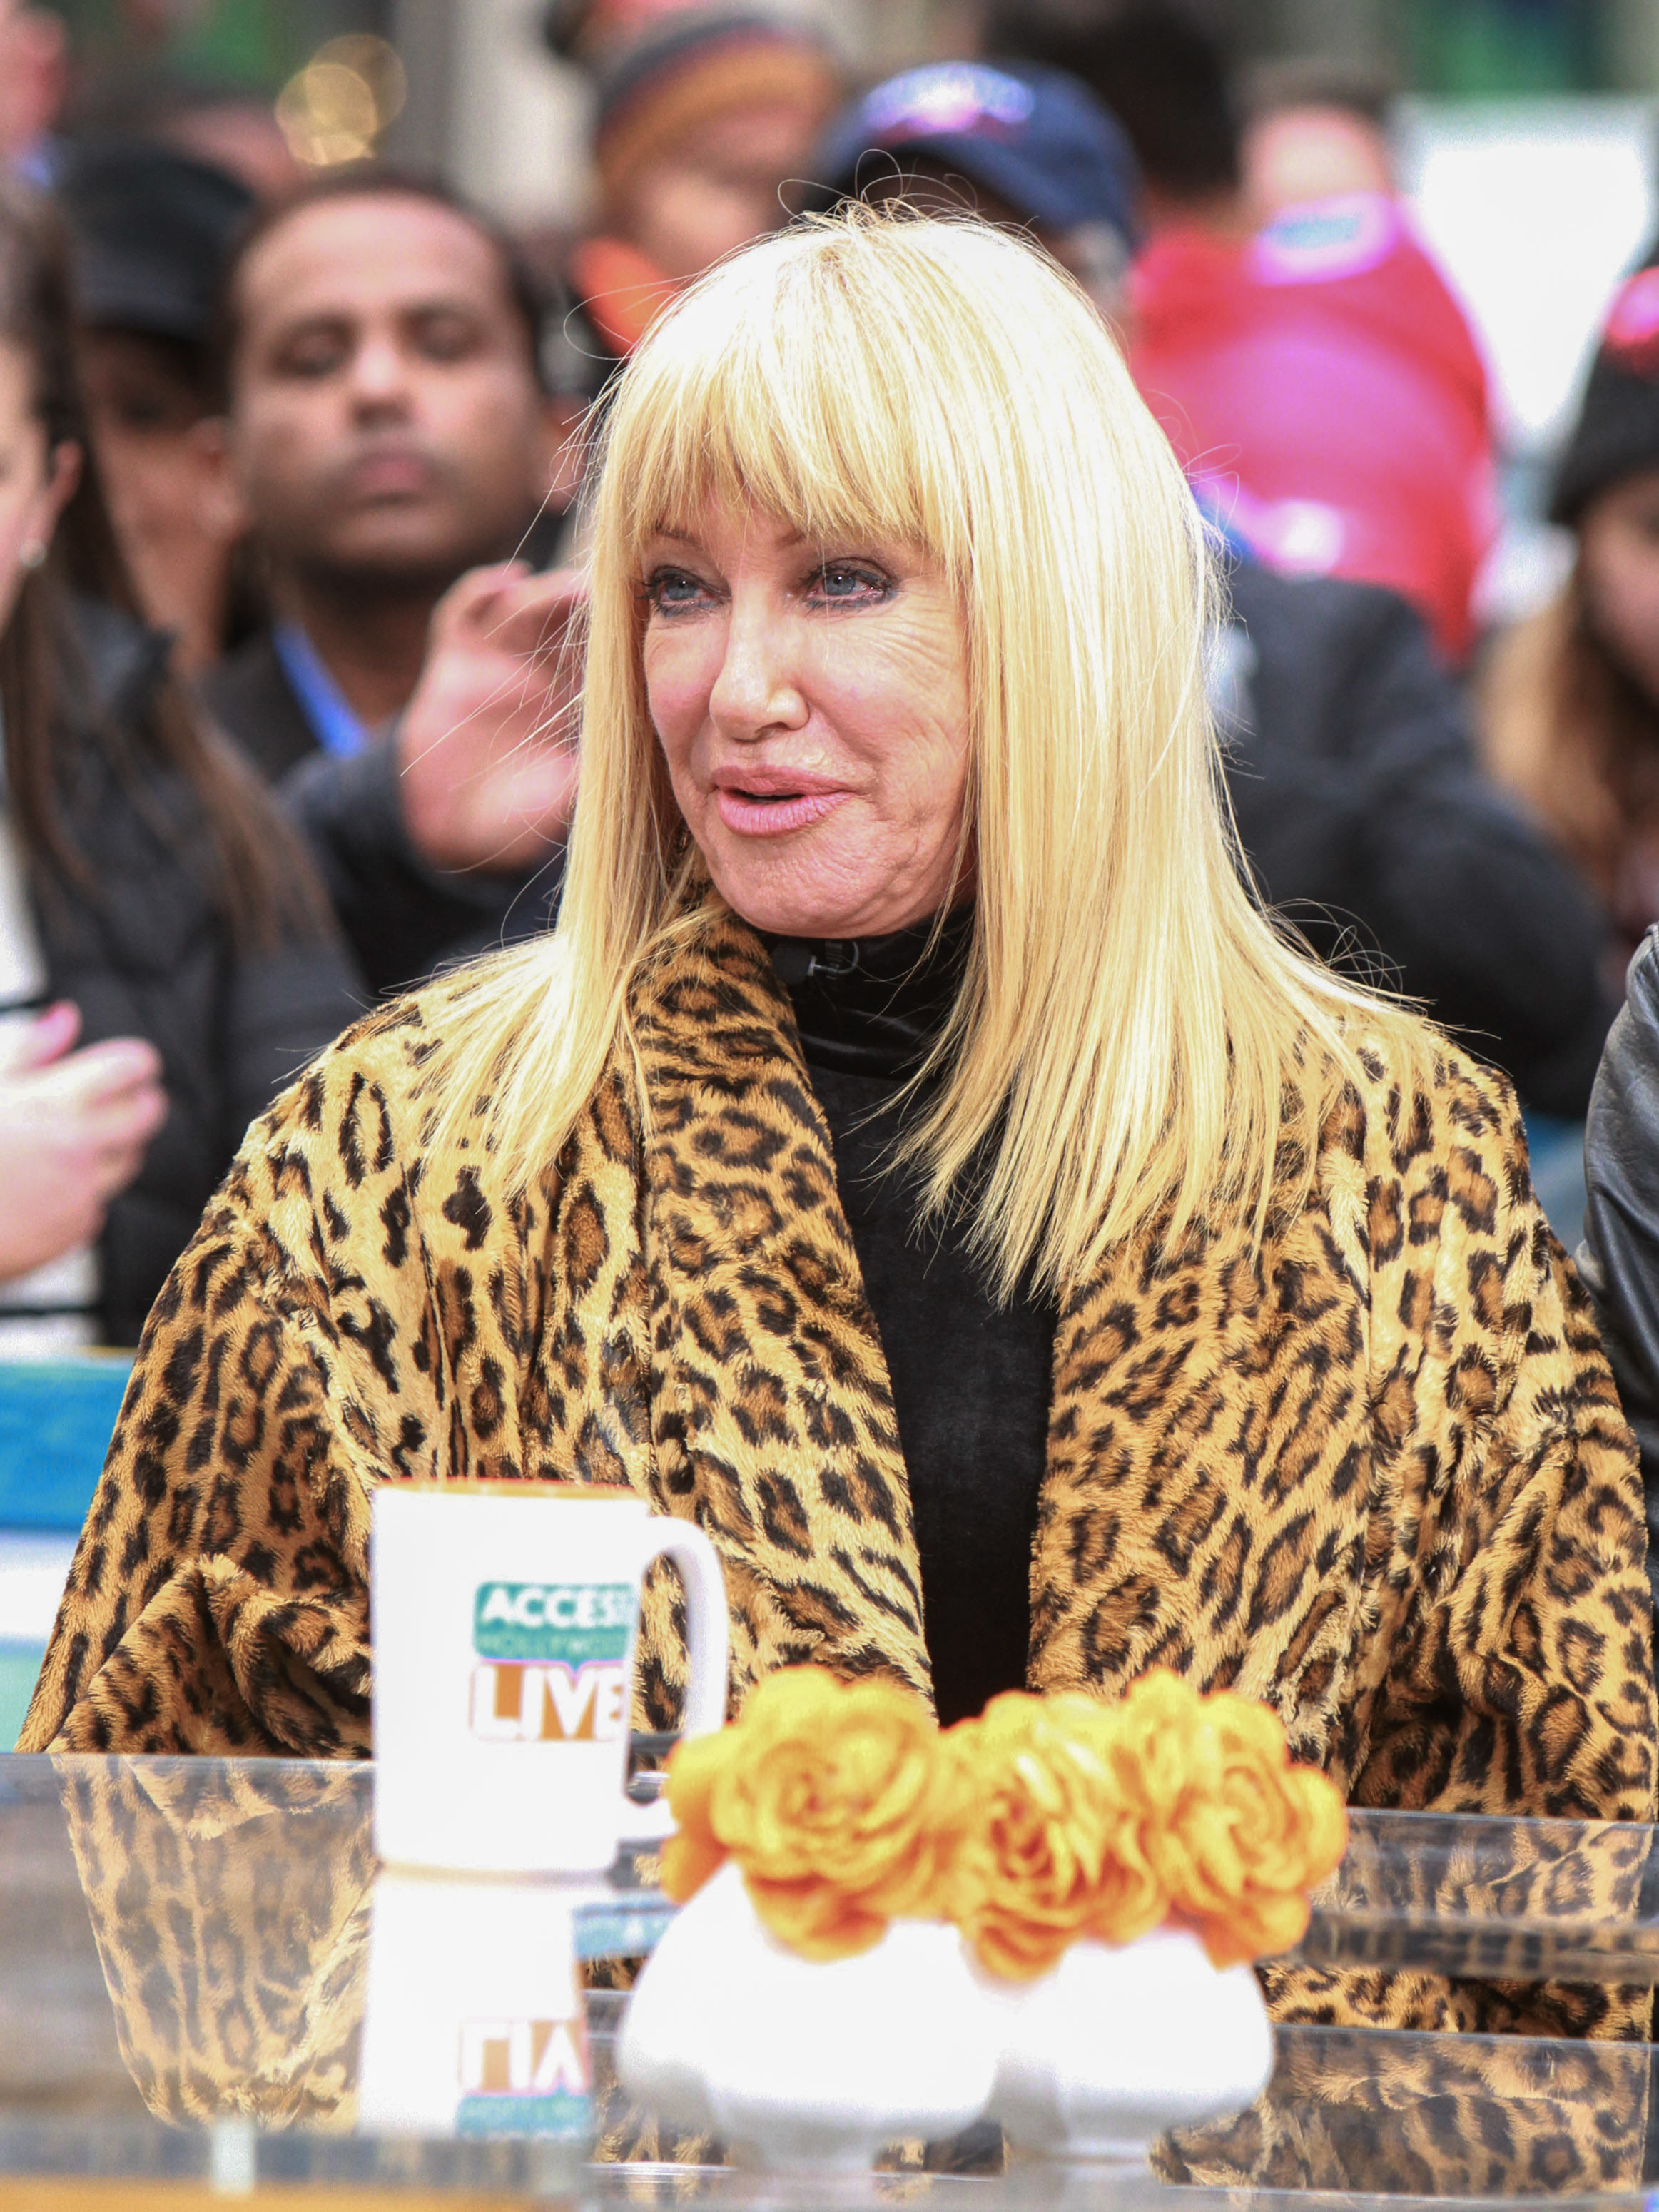 Suzanne Somers à 'Access Hollywood' le 16 novembre 2017 à New York | Source : Getty Images